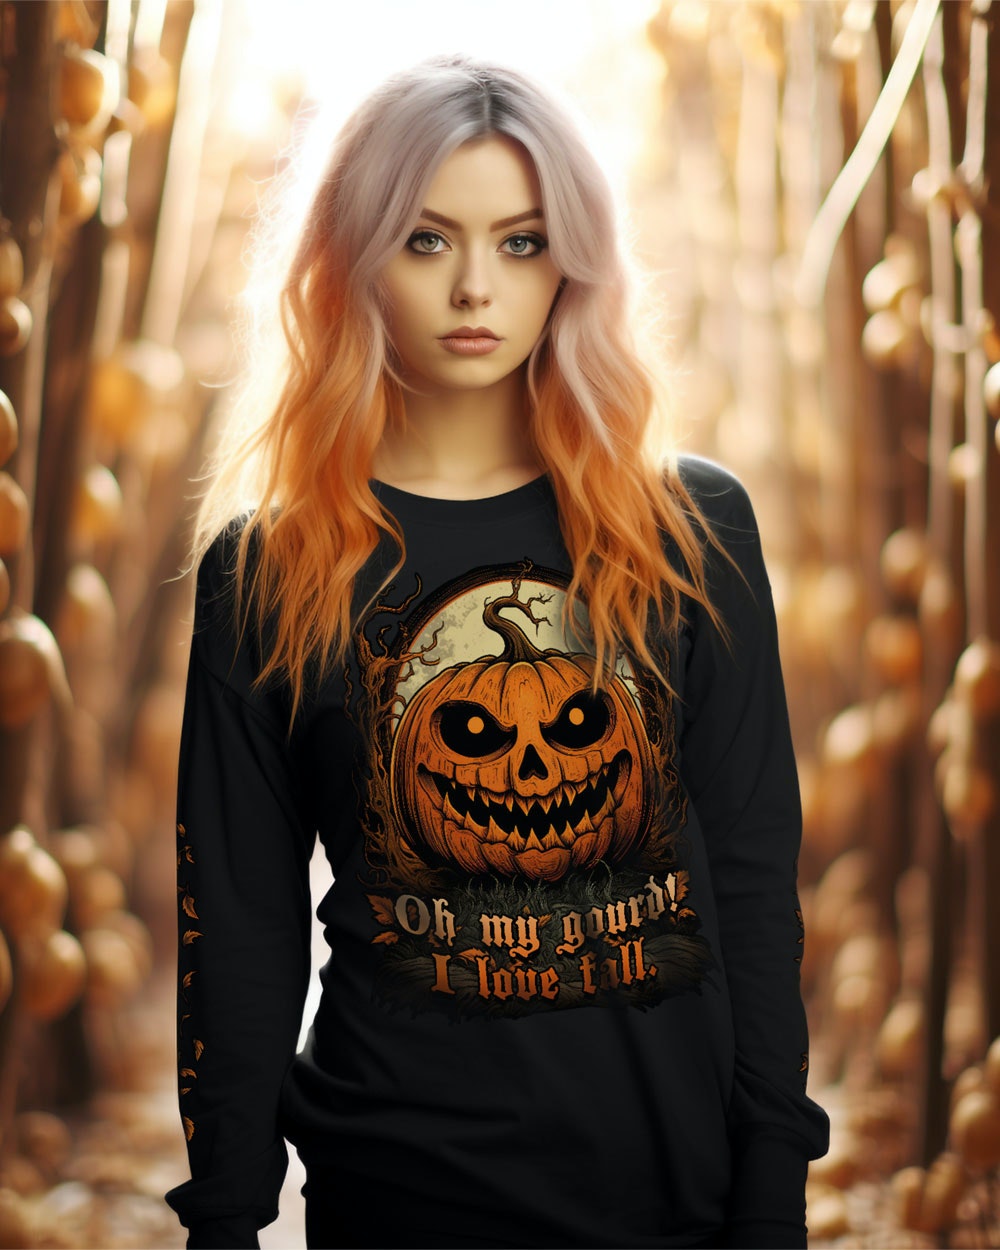 OMG! Long Sleeve Tee - Alt Goth Top in Dark Academia Occult Witchy Style Unisex Halloween Gift